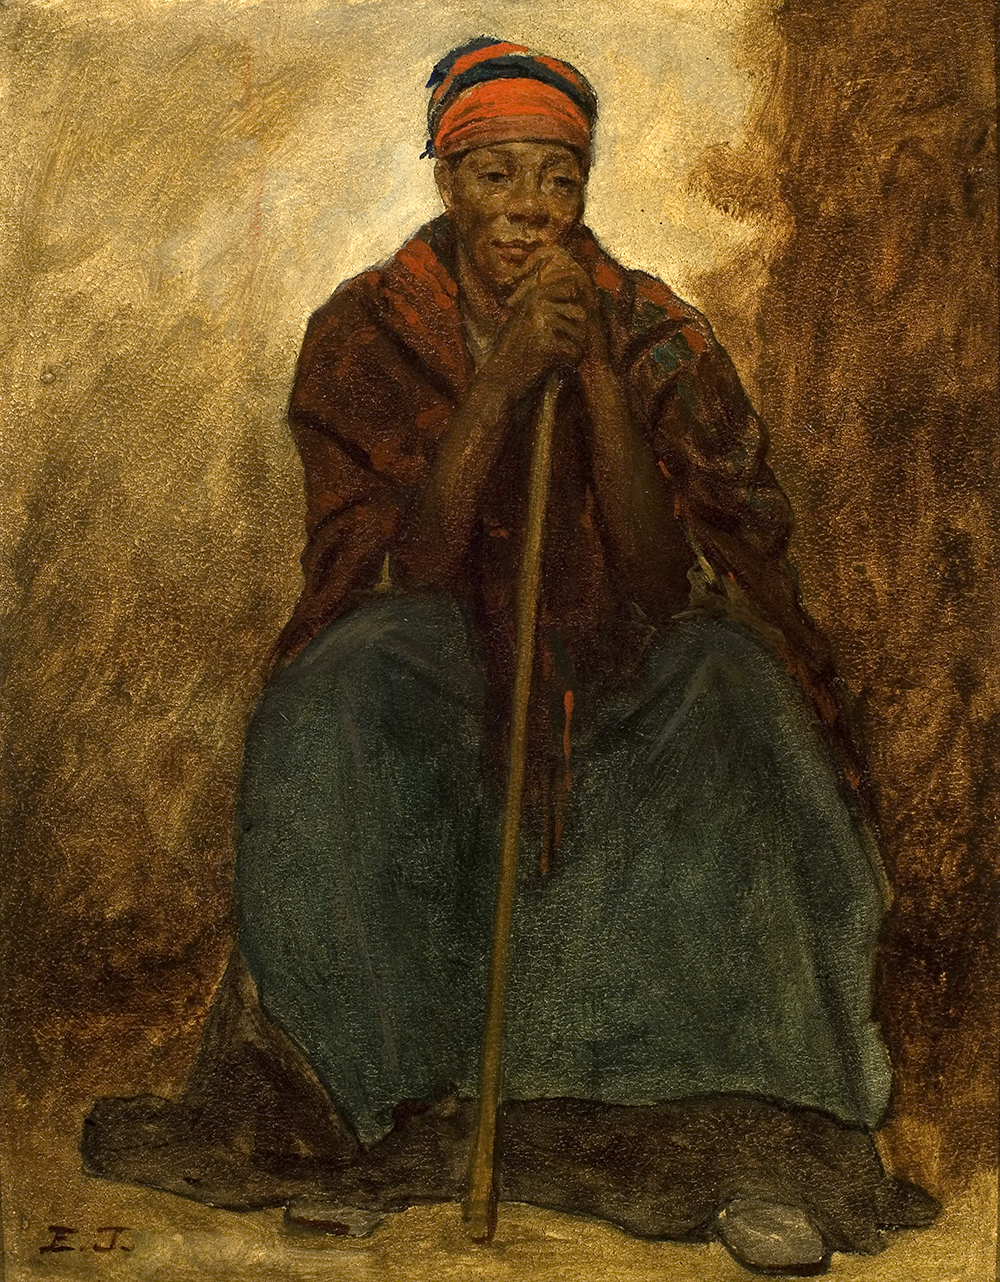 Painted portrait of an enslaved Black woman with a pensive expression, sitting and holding a staff